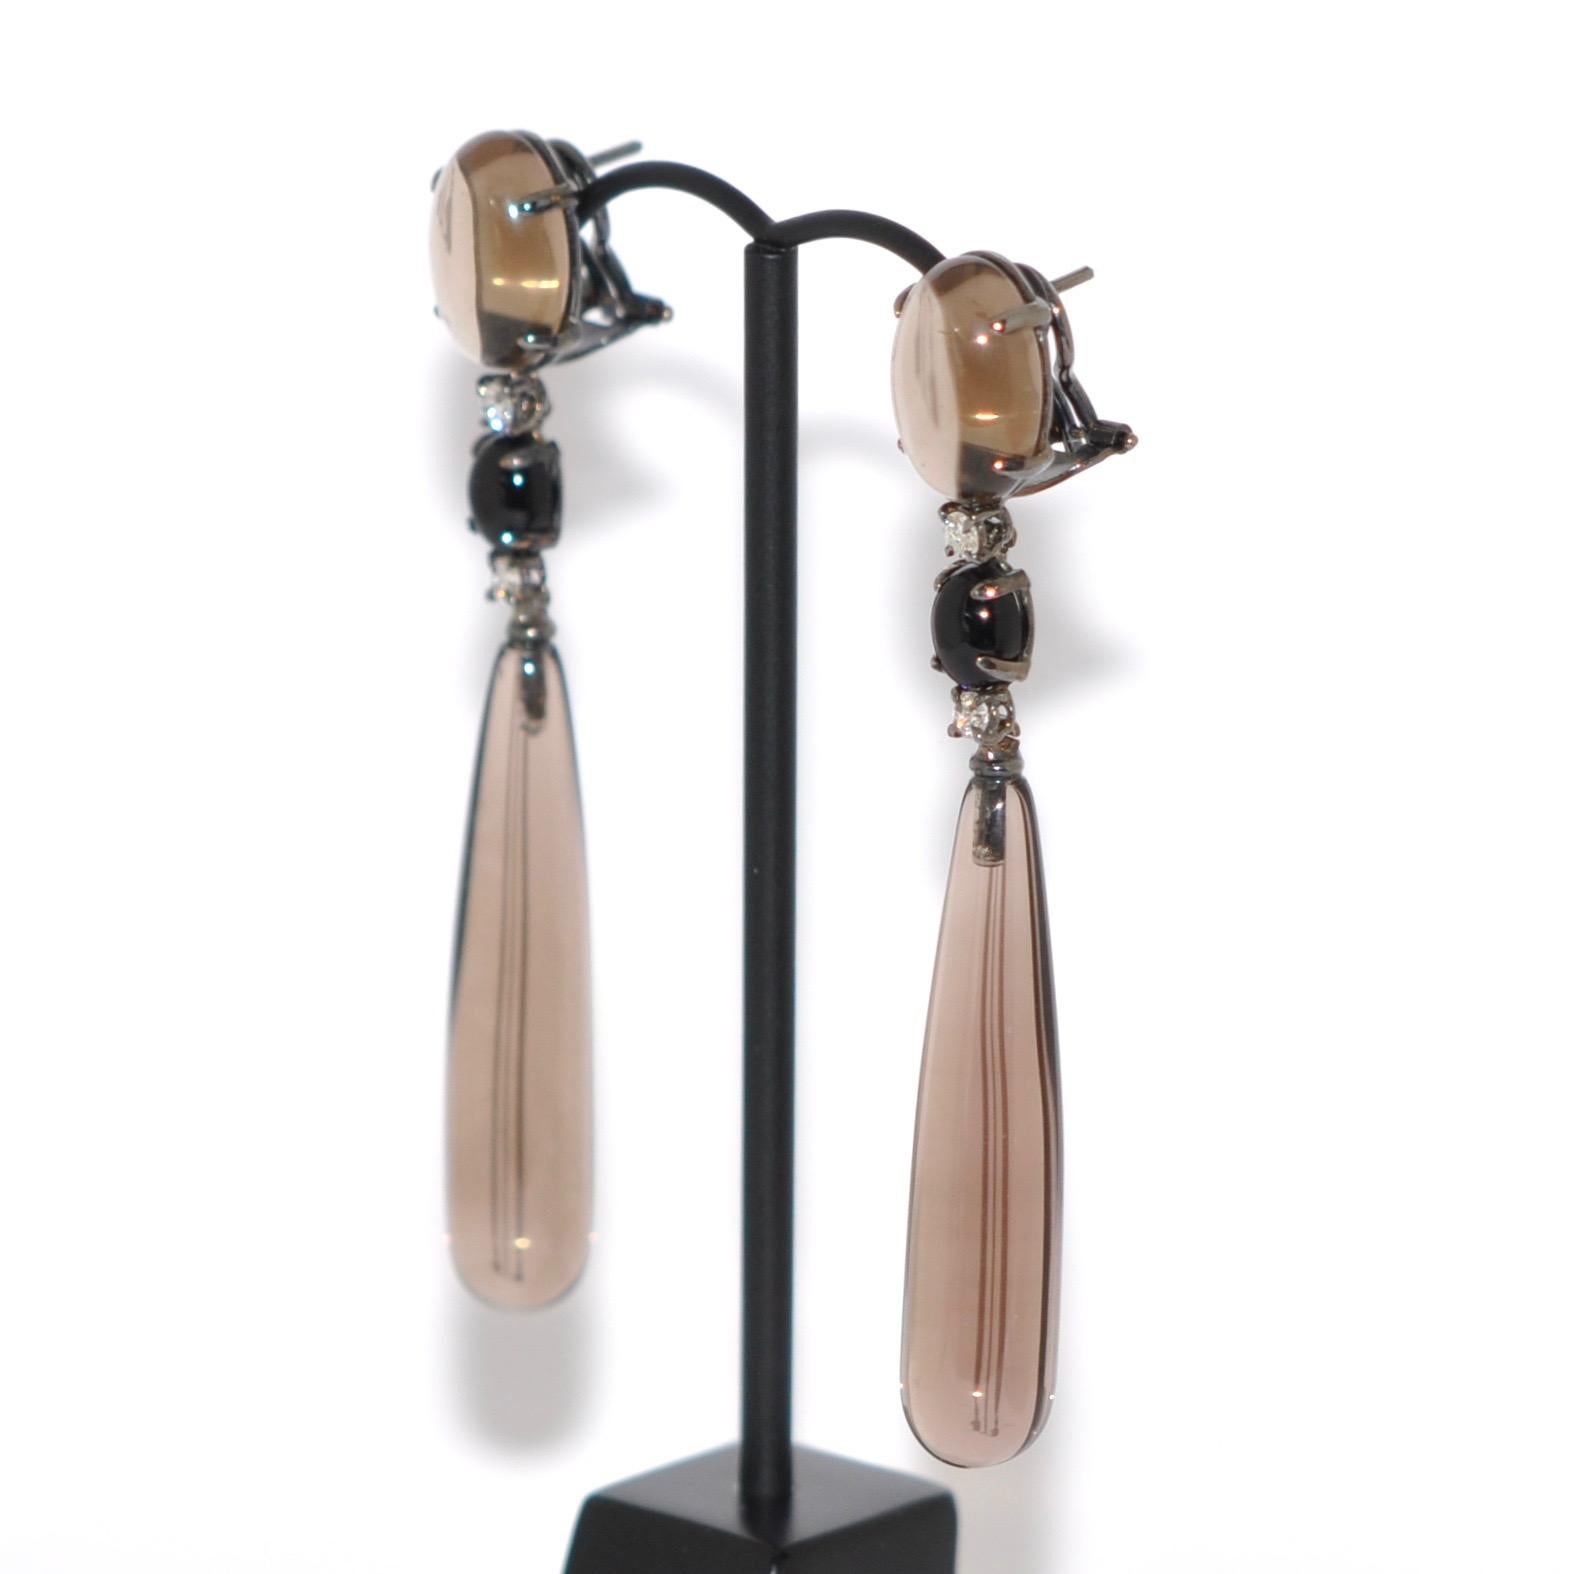 Magnificent chandelier earrings in 18-carat black gold, adorned with smoky quartz, agate and white diamonds. These exquisite earrings combine the elegance of deep black gold with the natural beauty of gemstones.

Smoky quartz, with its warm, smoky